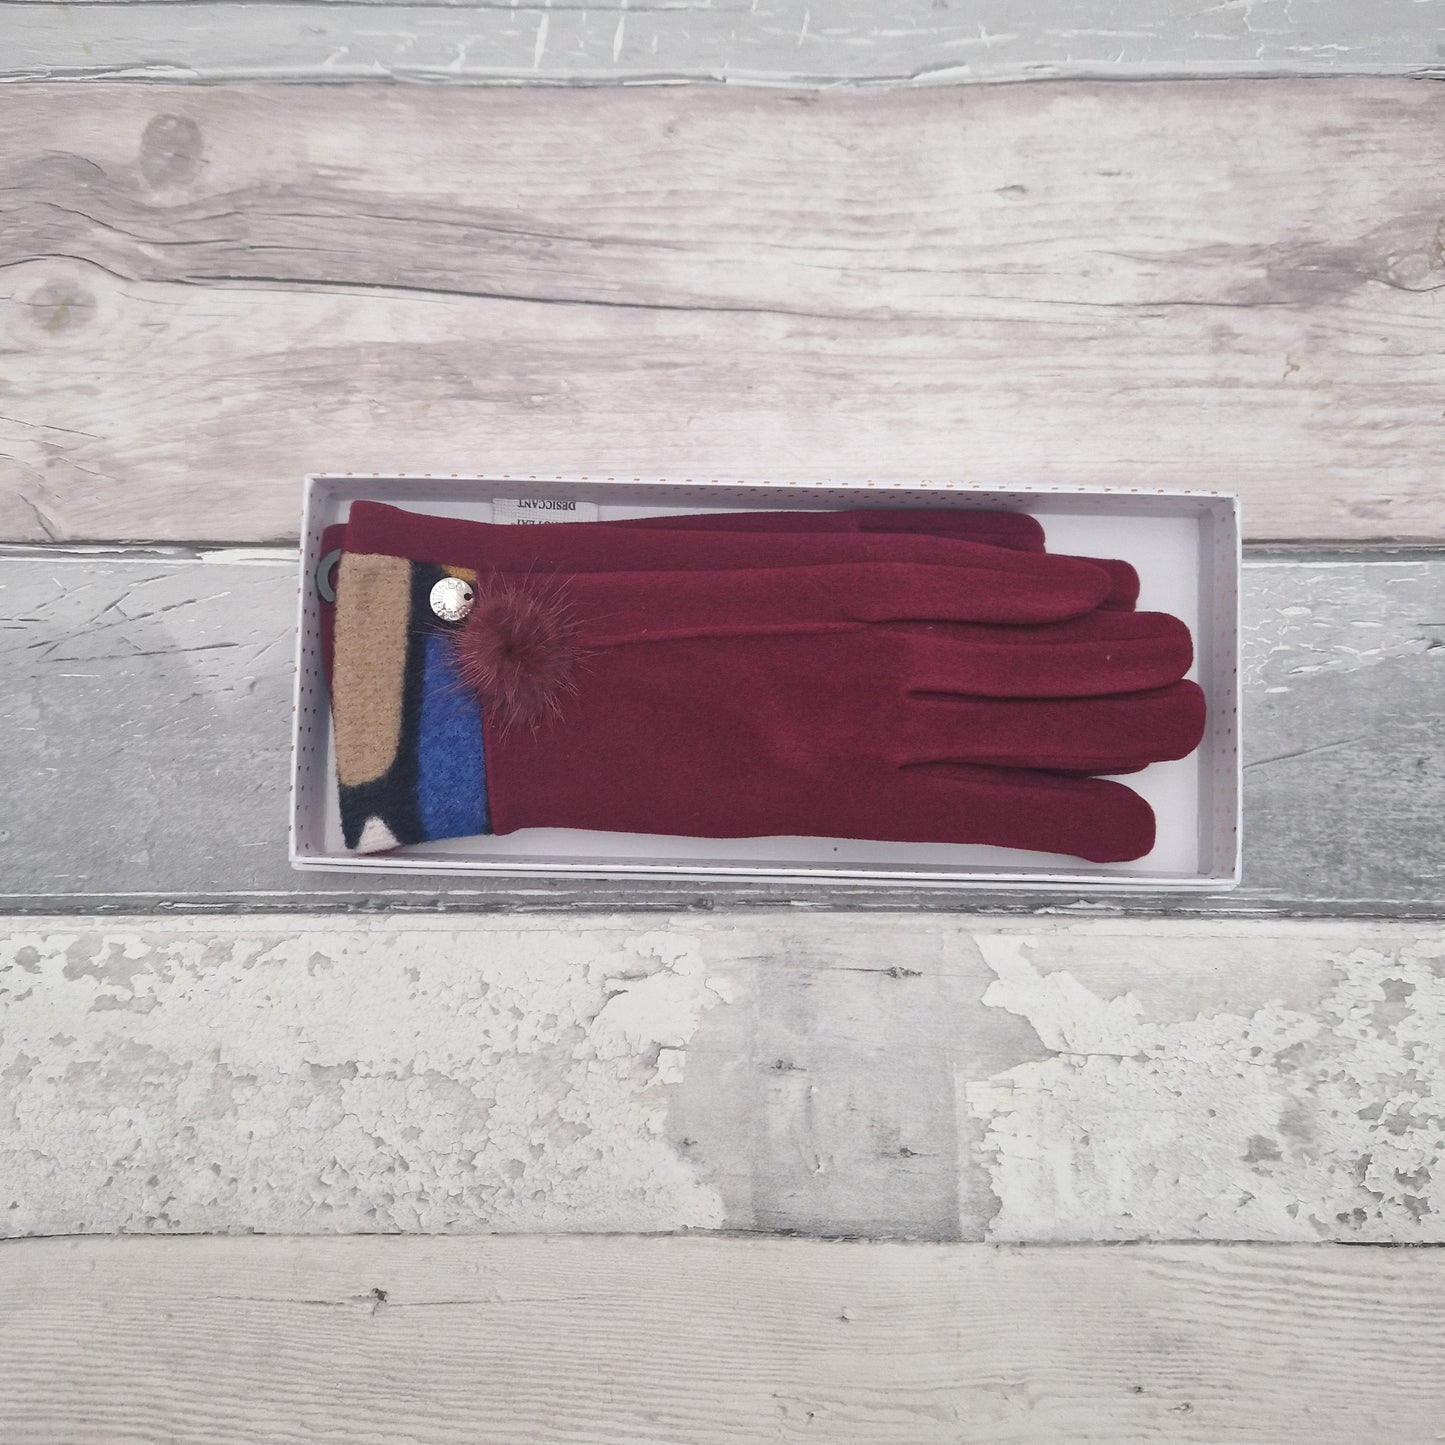 Red gift boxed gloves with a jazzy coloured cuff and fluffy pom pom